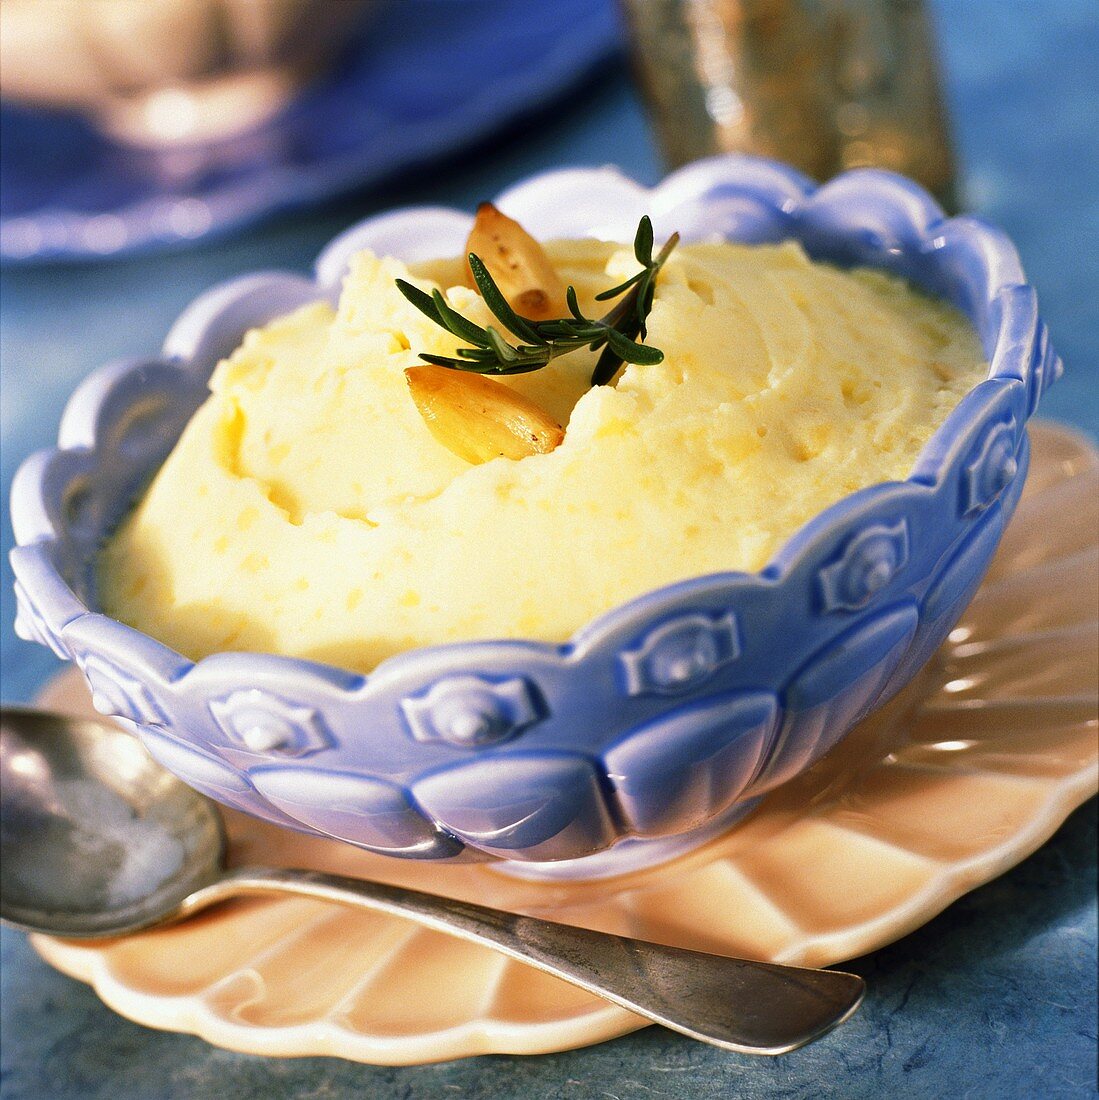 Mashed Potatoes with Garlic and Rosemary